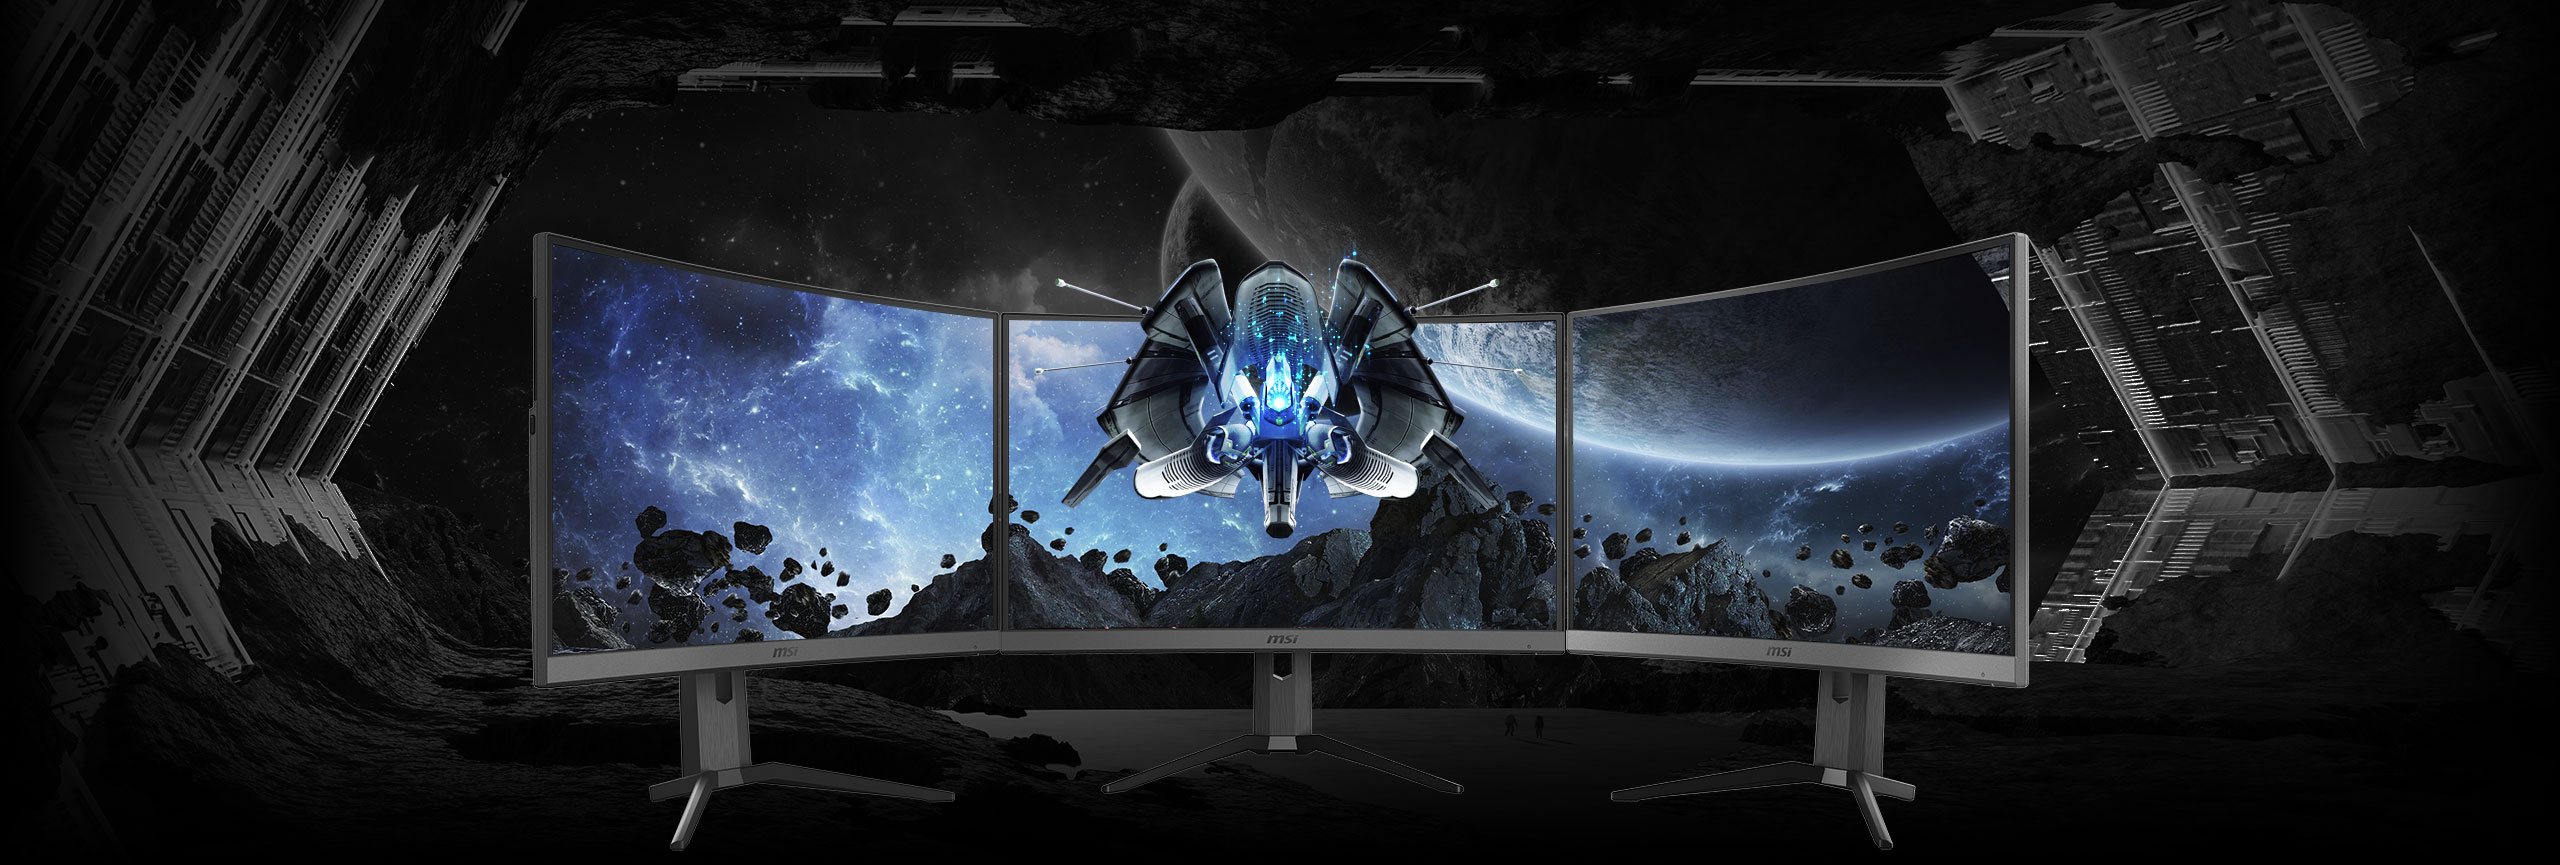  three monitors side-by-side with a space image as screen  